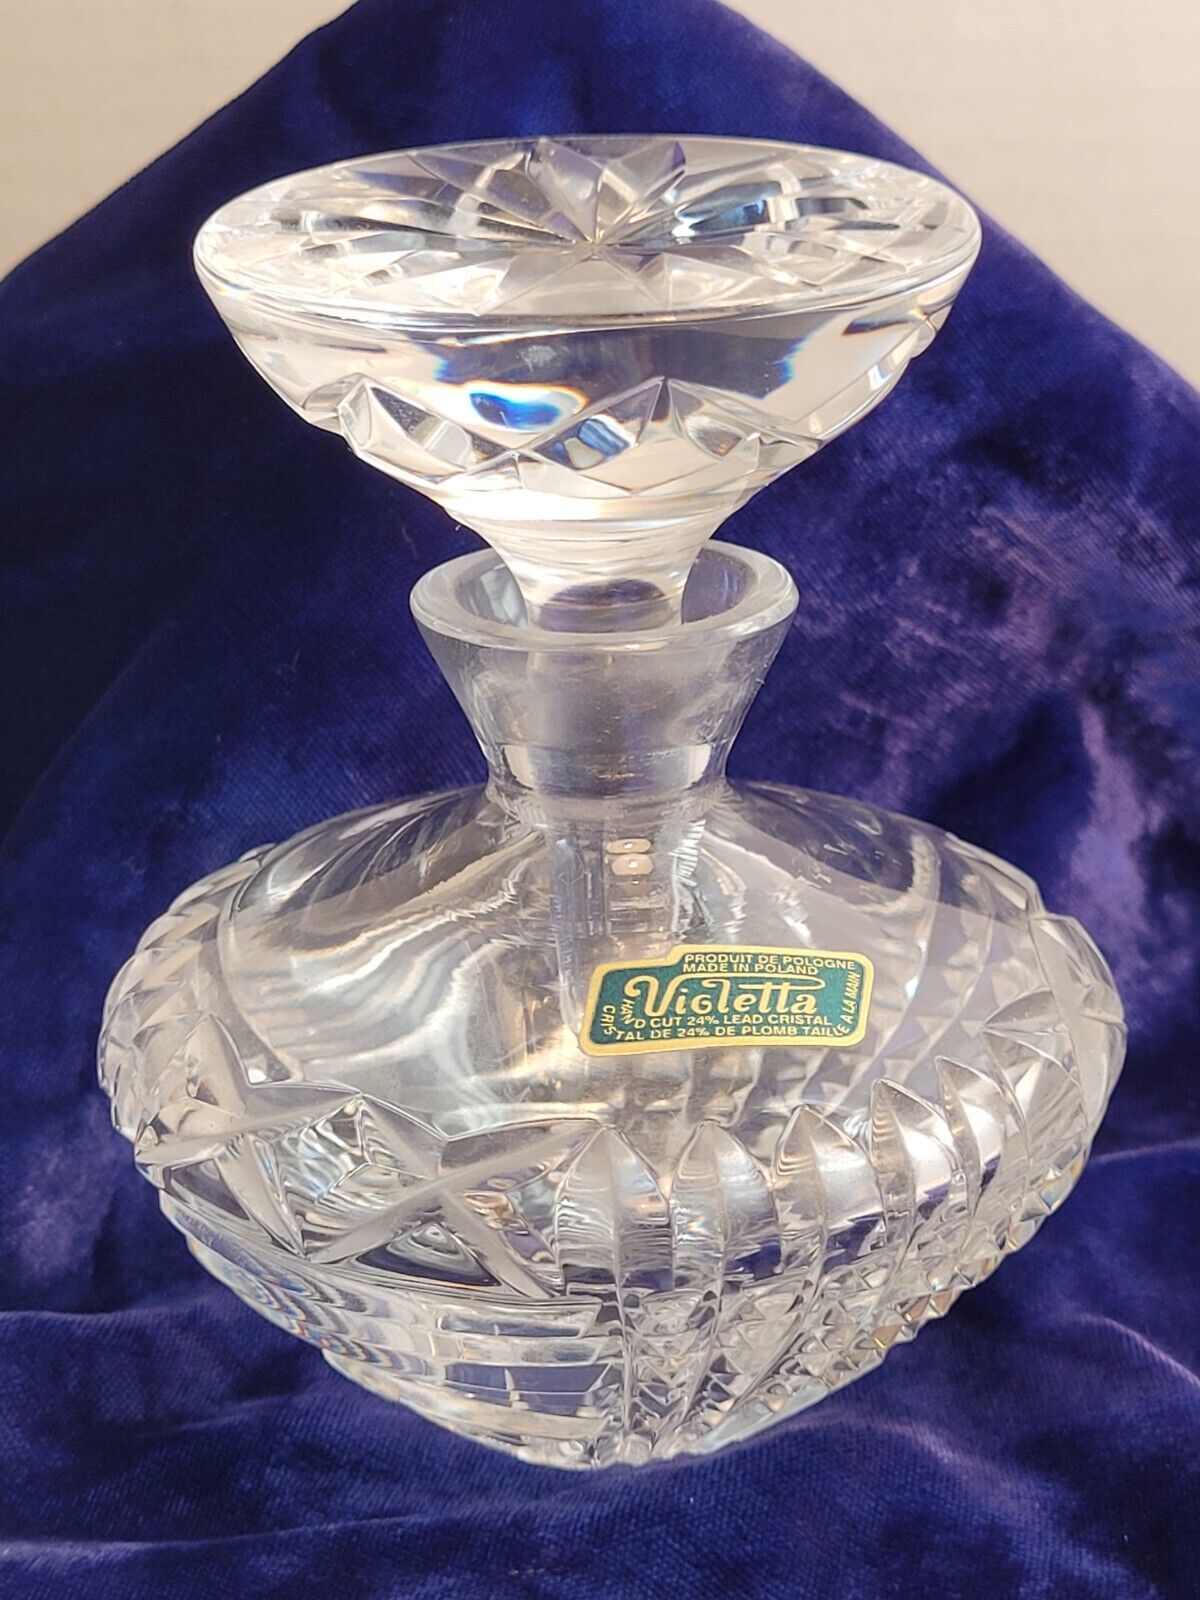 Vintage Violetta Lead Crystal Perfume Cologne Bottle Made In Poland Collectible